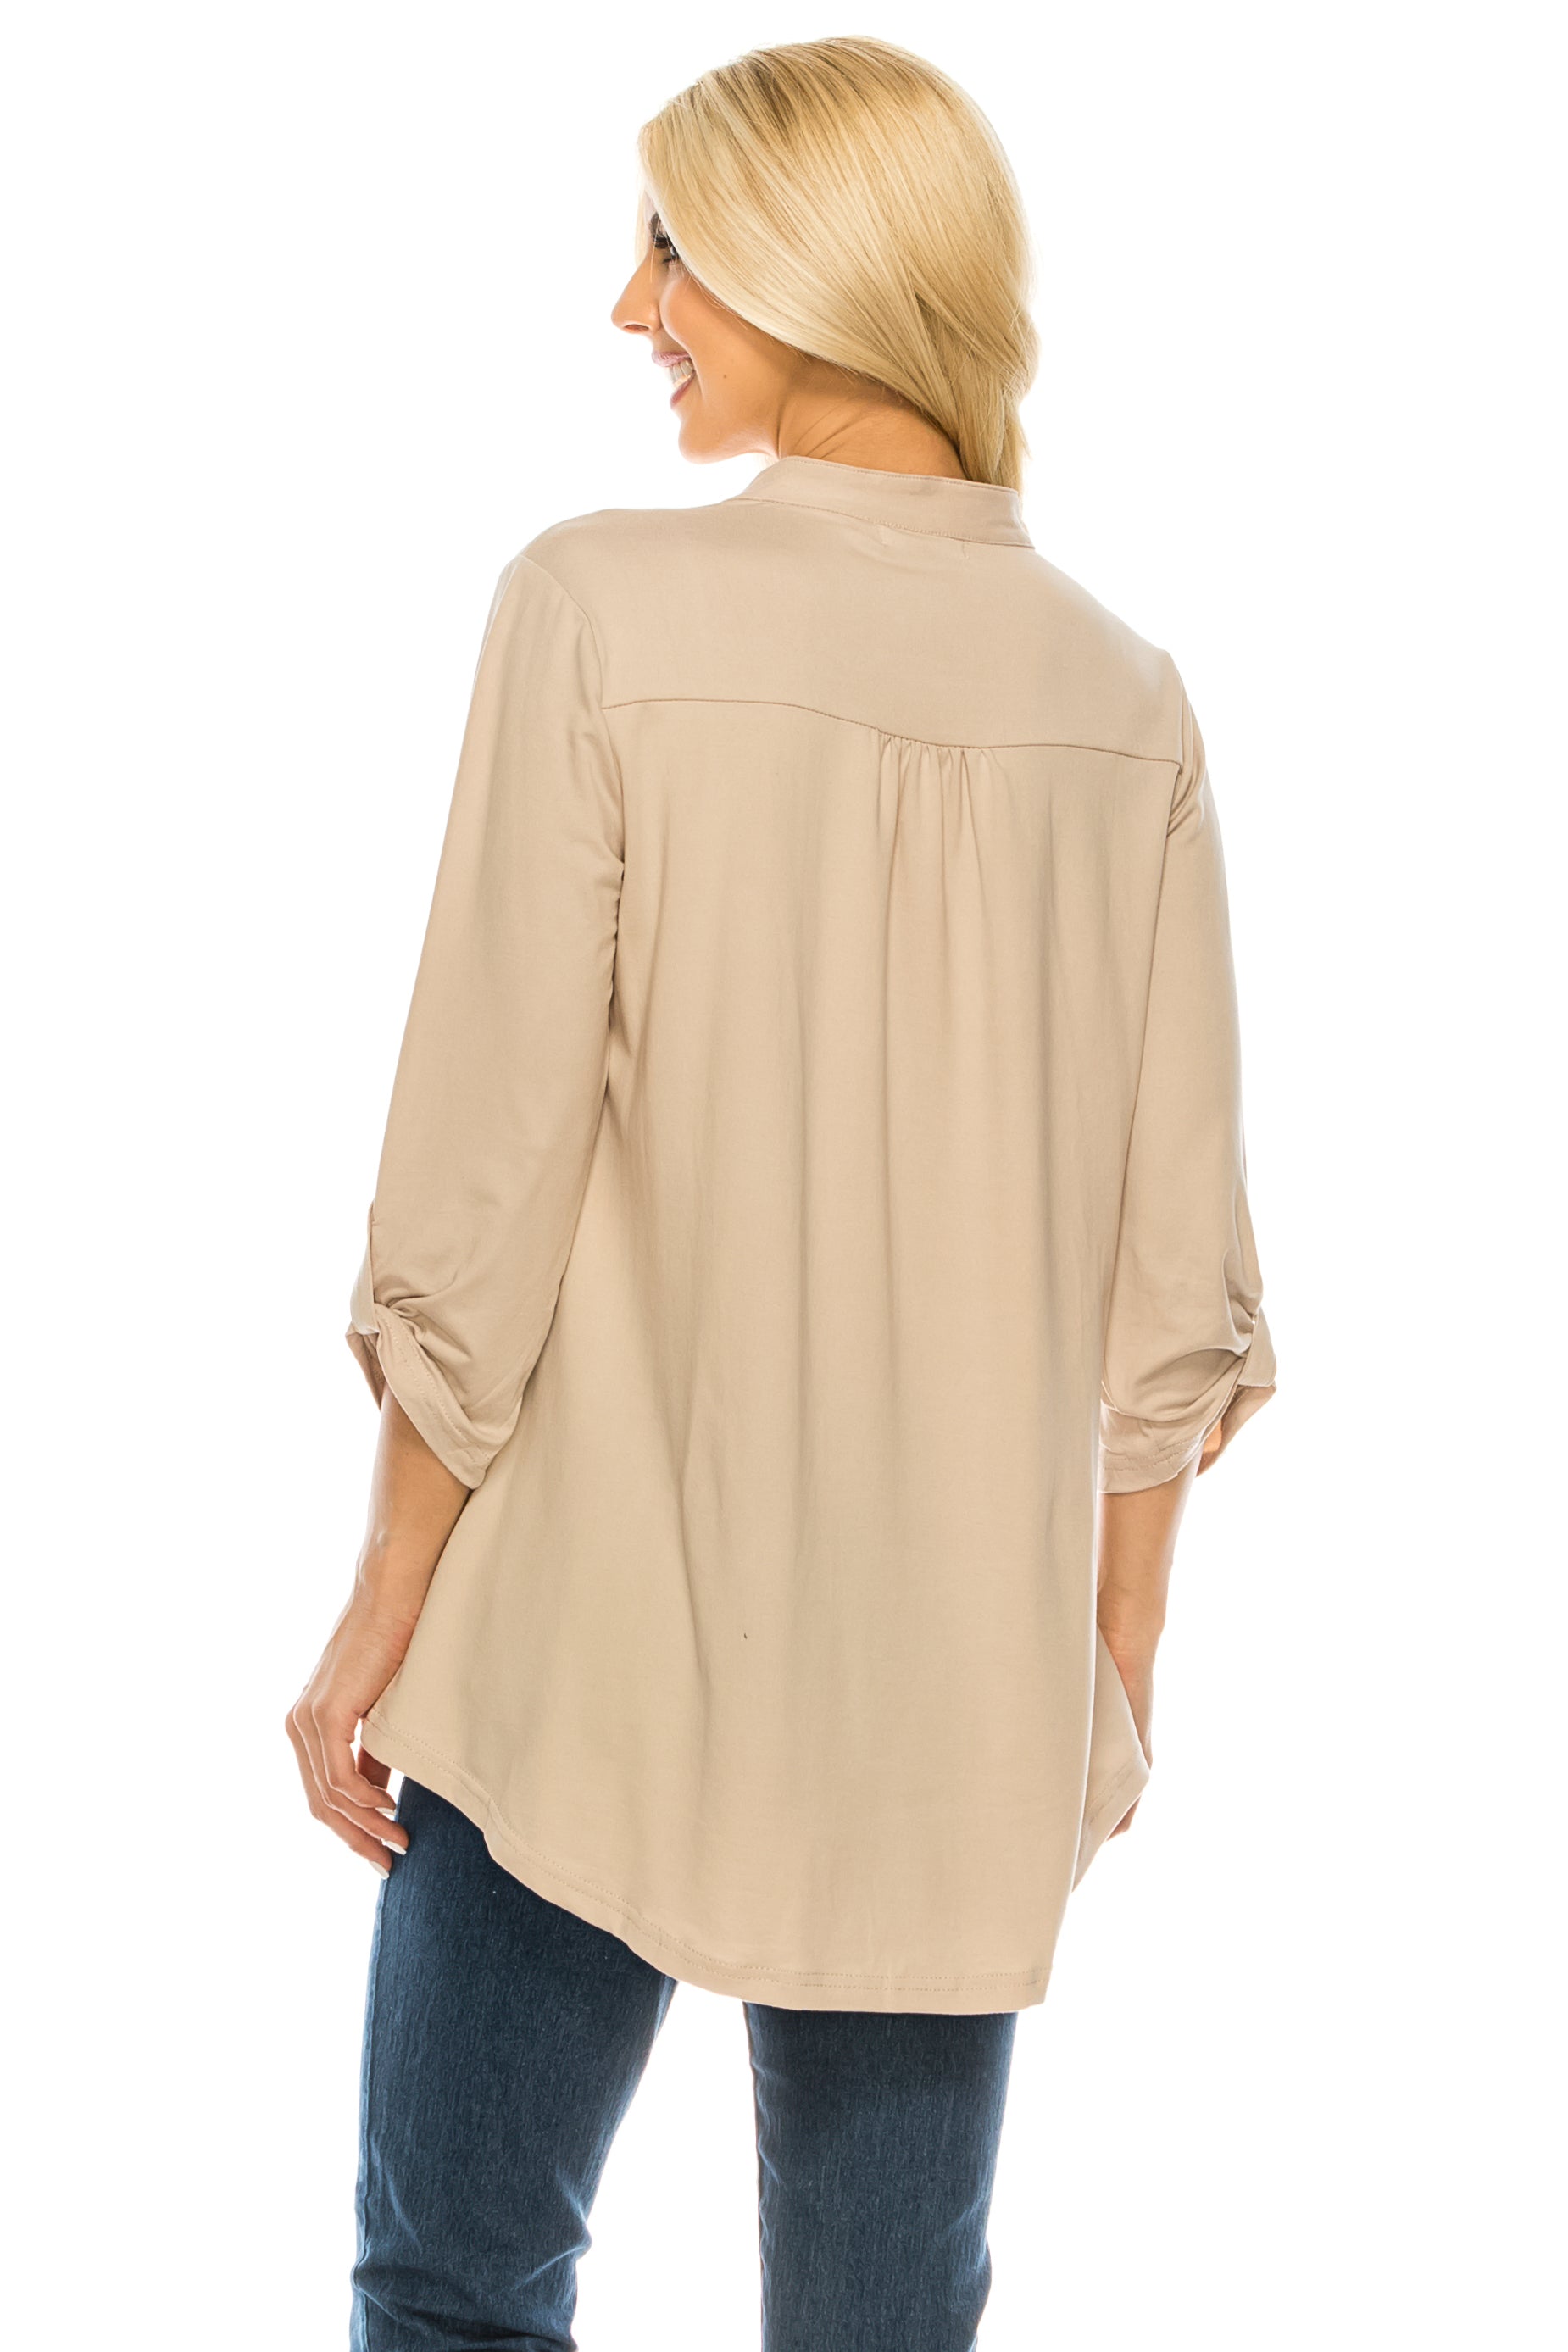 Haute Edition Women's 3/4 Sleeve Tunic Tops S-3X Solid. Plus size available. DAILYHAUTE